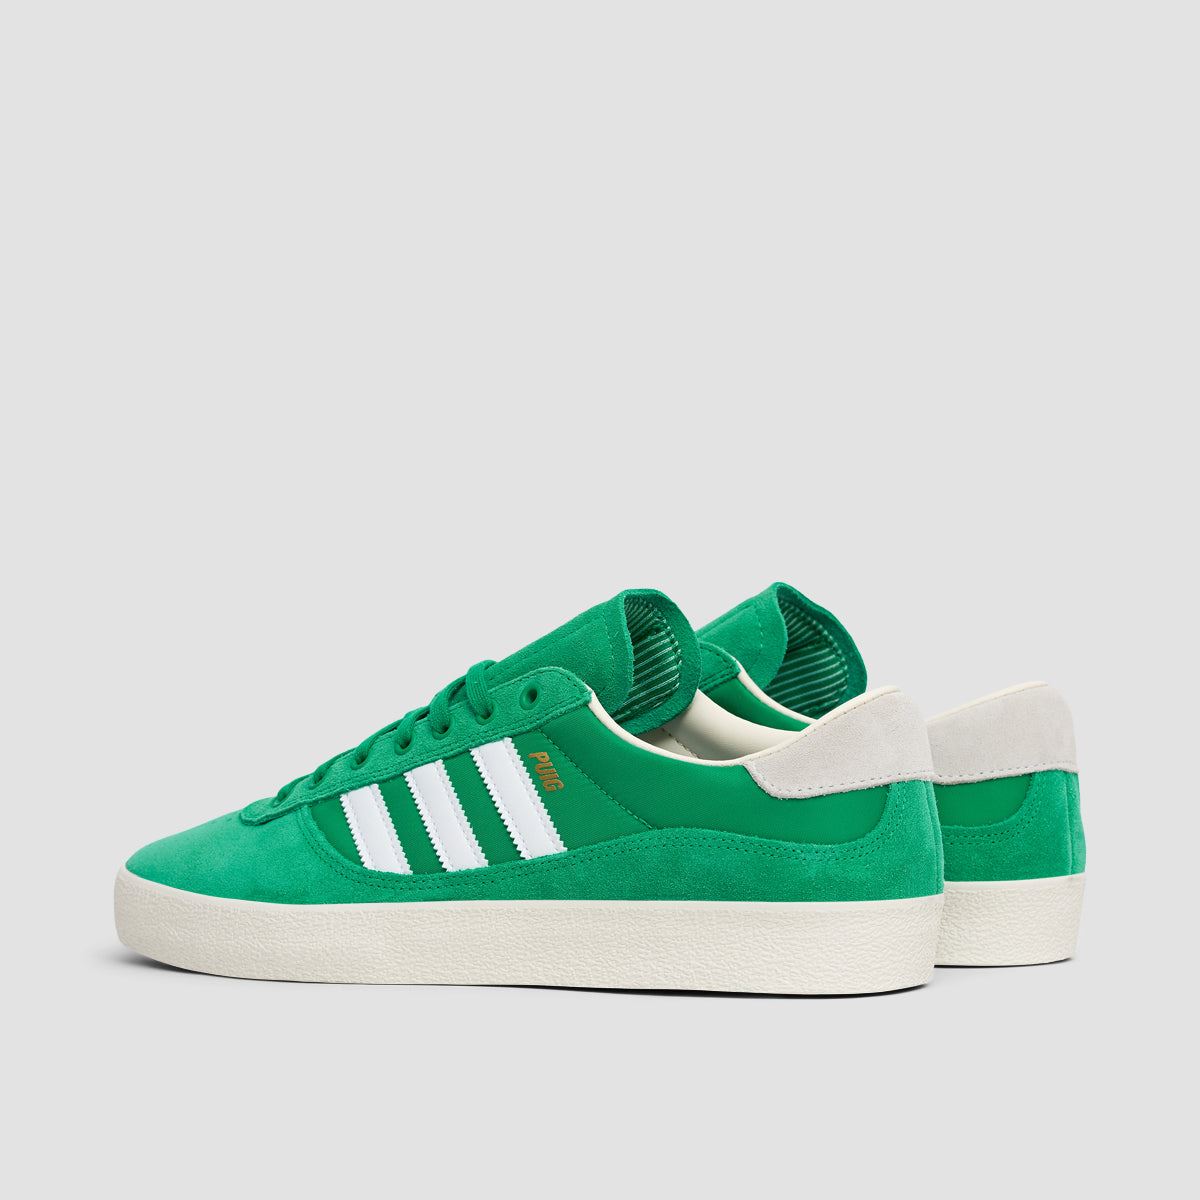 adidas Puig Indoor Shoes - Cou Green/Footwear White/C White